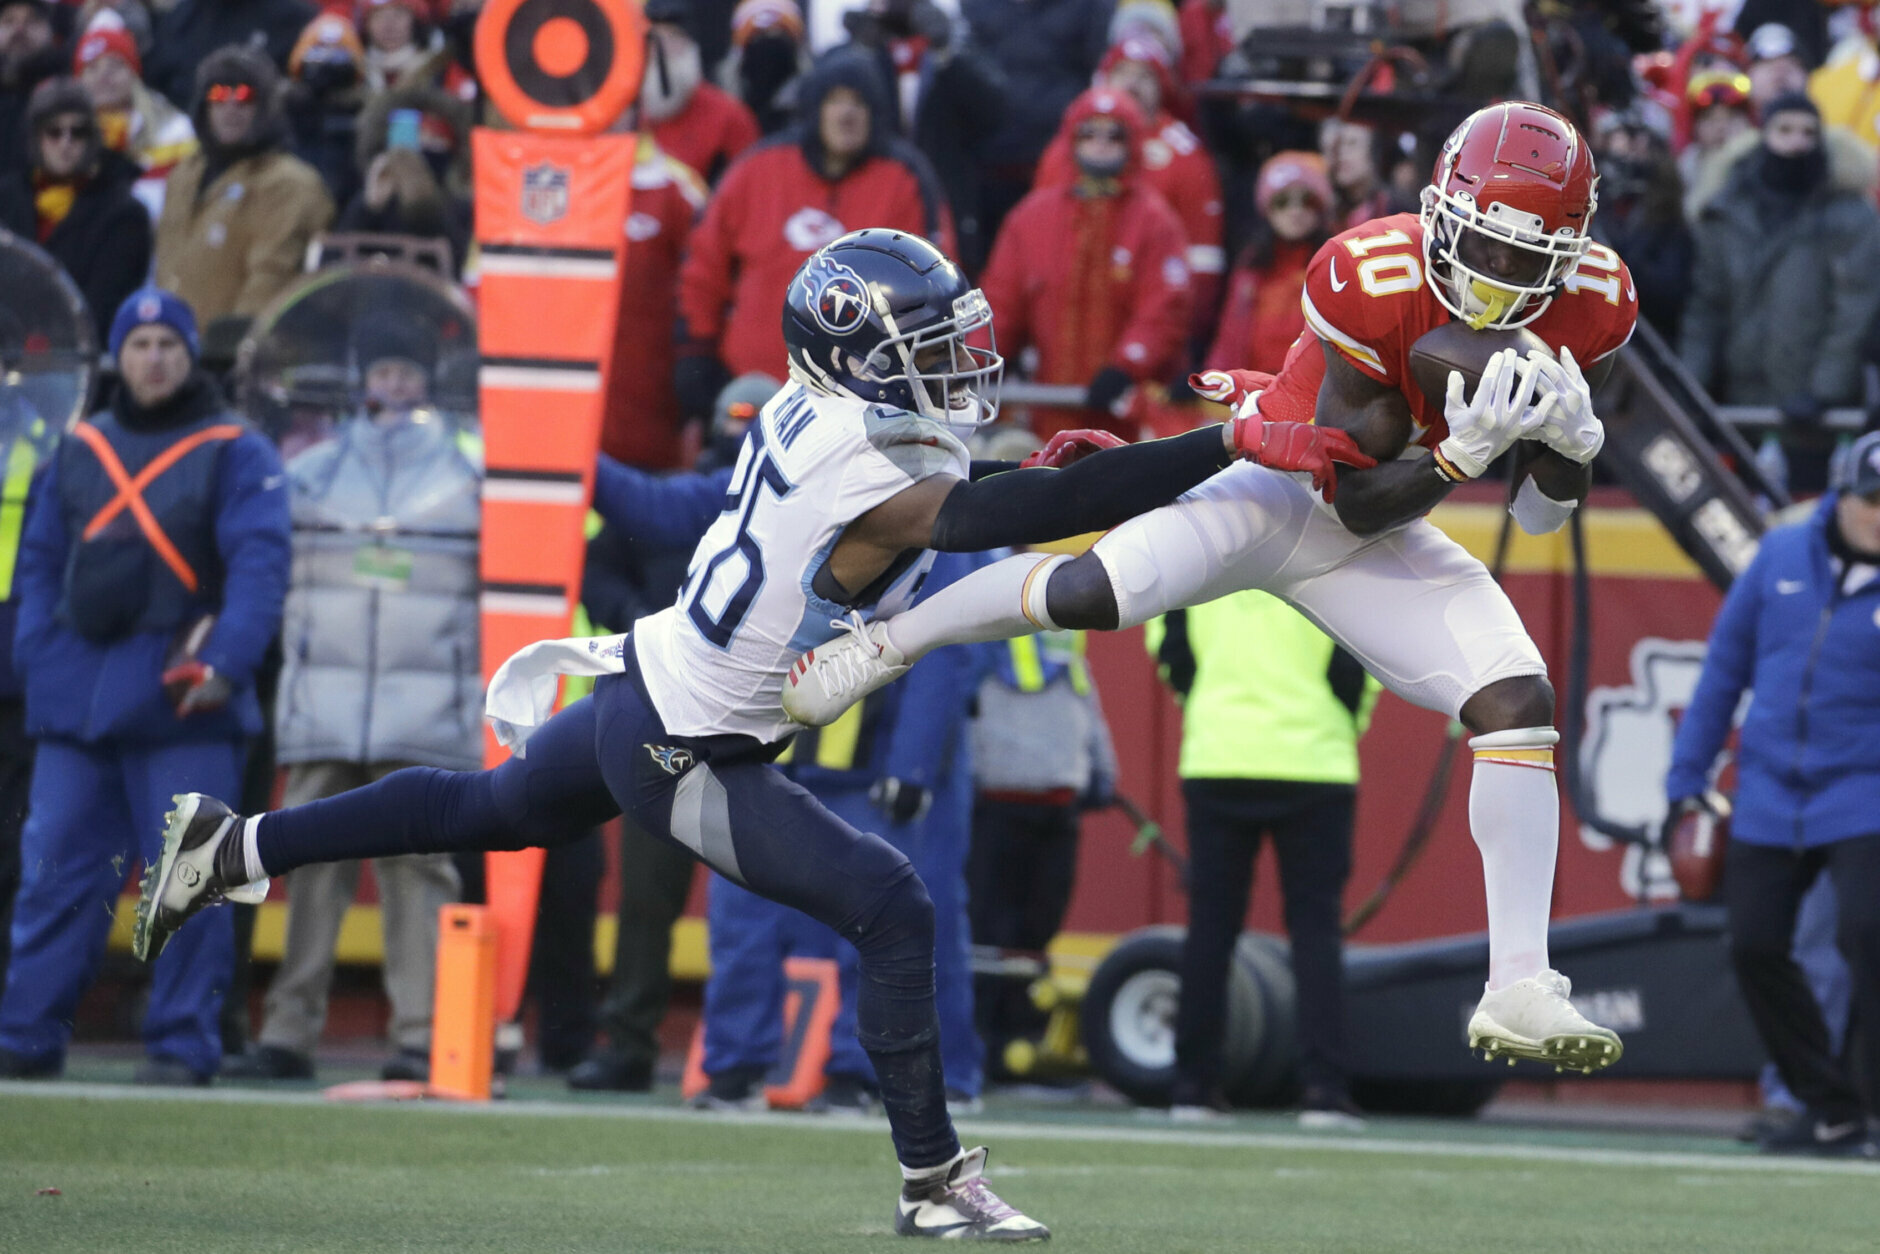 <p><b><i>Titans 24</i></b><br />
<b><i>Chiefs 35</i></b></p>
<p>Kansas City&#8217;s run is poetic for so many reasons. The Chiefs&#8217; Super Bowl IV victory was the last meeting between the AFL and NFL before the 1970 merger, and it feels like Andy Reid — whose championship drought is roughly half as long — is due for a breakthrough. Patrick Mahomes is here to <a href="https://twitter.com/ESPNStatsInfo/status/1219053473880211463?s=20" target="_blank" rel="noopener">remind you why he&#8217;s the reigning MVP</a> and the Chiefs defense is eerily reminiscent of <a href="https://pick256.wordpress.com/2012/01/31/the-worst-defense-to-ever-win-a-super-bowl-the-2006-colts/" target="_blank" rel="noopener">the 2006 Colts D</a> that woke up from a regular season slumber to propel Tony Dungy to his long-awaited title.</p>
<p>Though the Titans fell short of a Super Bowl, Tennessee&#8217;s unexpected run to Championship Sunday was impressive. After steamrolling the Chiefs in the regular season, Derrick Henry&#8217;s <a href="https://profootballtalk.nbcsports.com/2020/01/13/derrick-henry-having-a-postseason-for-the-ages/" target="_blank" rel="noopener">postseason for the ages</a> ended with only 69 yards — but it was enough to <a href="https://www.cbssports.com/nfl/news/afc-championship-game-2020-derrick-henry-breaks-john-riggins-37-year-old-playoff-rushing-record/" target="_blank" rel="noopener">snap a playoff record</a> near and dear to the hearts of Redskins fans. If <a href="https://www.insidehook.com/article/sports/derrick-henry-is-the-nfls-best-rb-but-the-titans-shouldnt-re-sign-him" target="_blank" rel="noopener">the case for Henry to leave Nashville</a> plays out, don&#8217;t be surprised to see the Skins throw a lot of money his way.</p>
